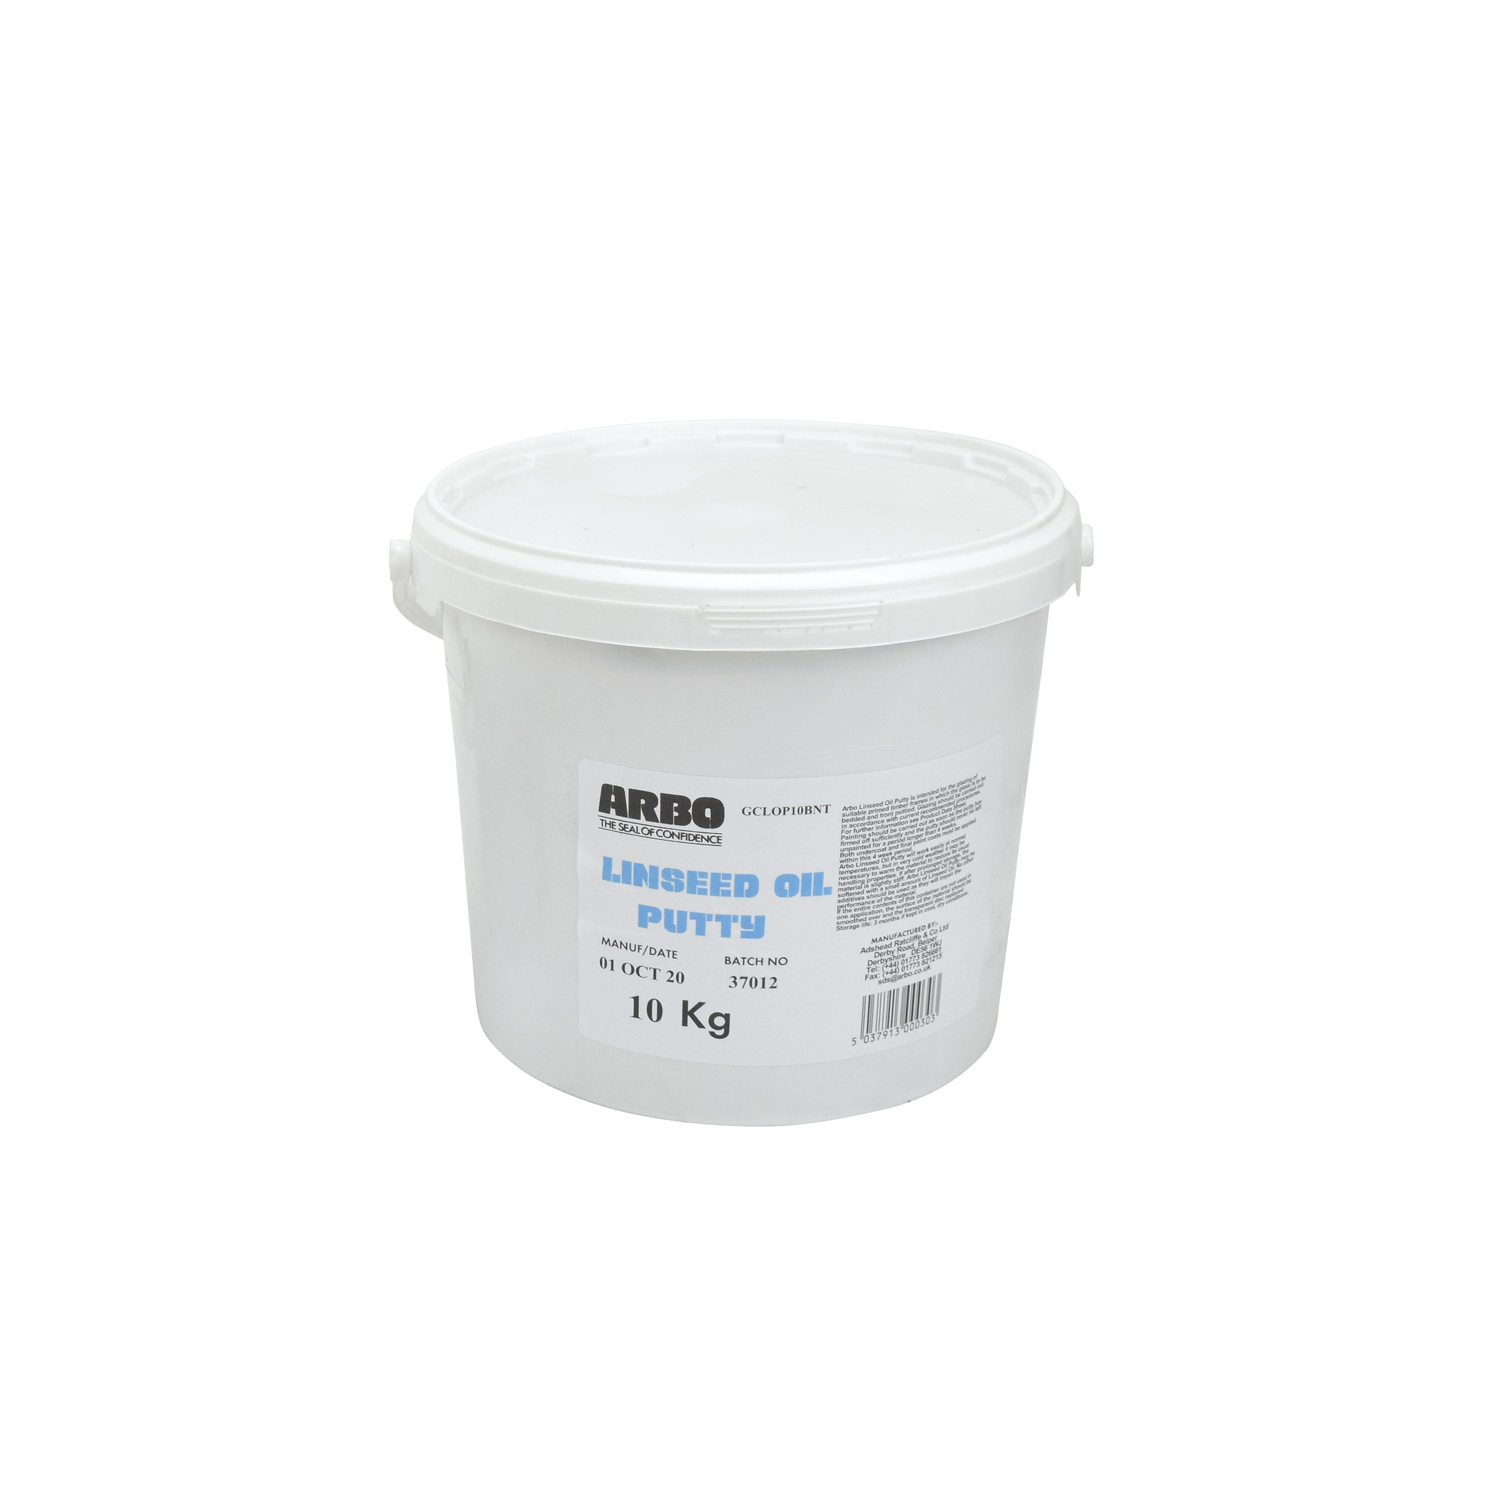 Arbo Linseed Oil Putty - 10kg